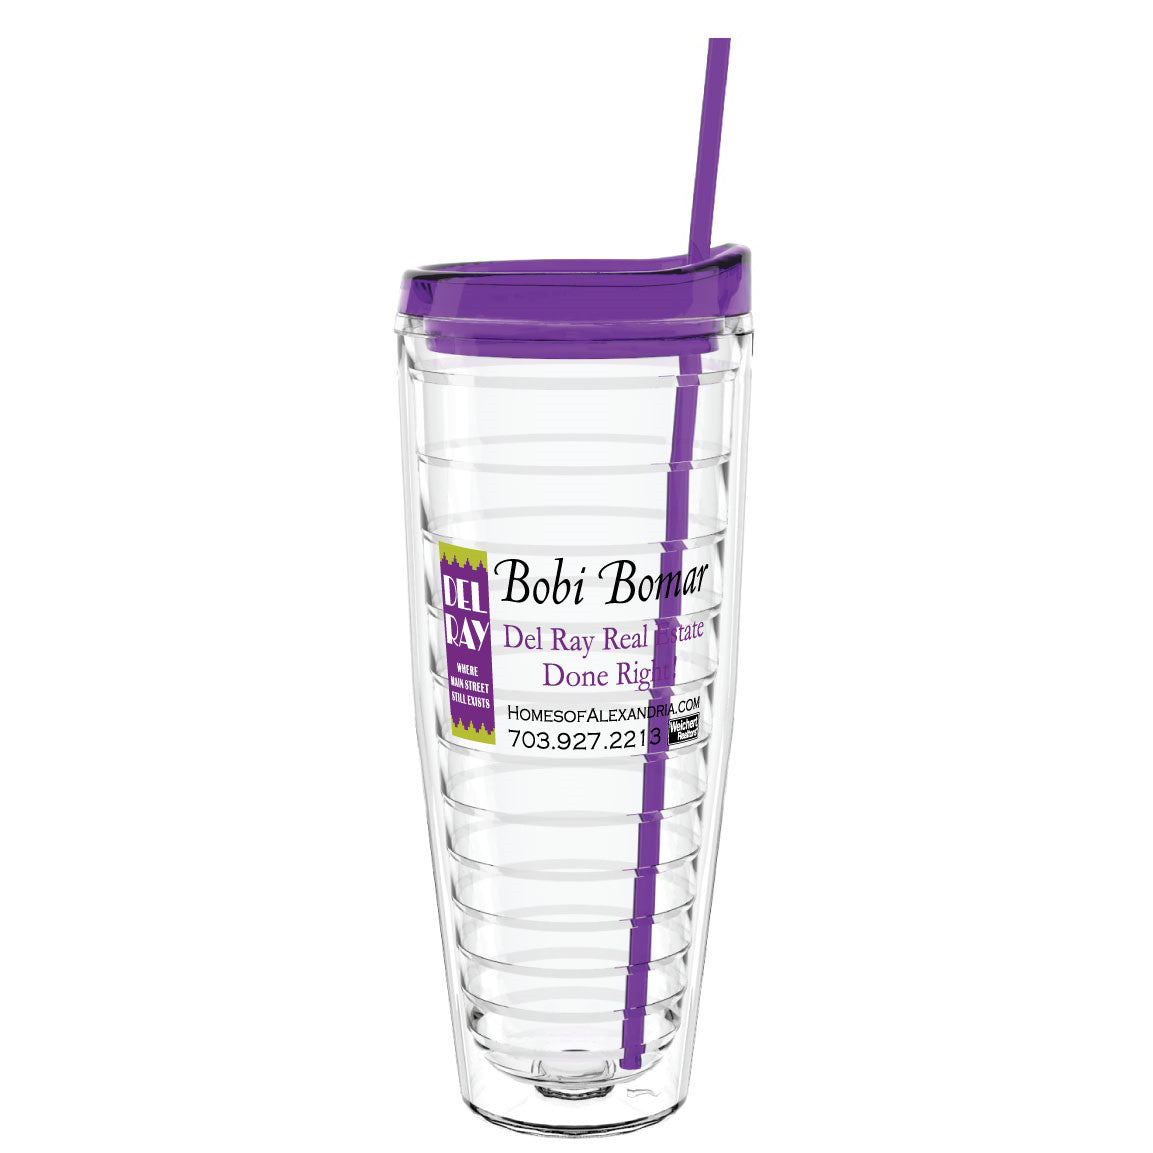 Personalized 16 oz. Tervis Tall Drinking Glasses